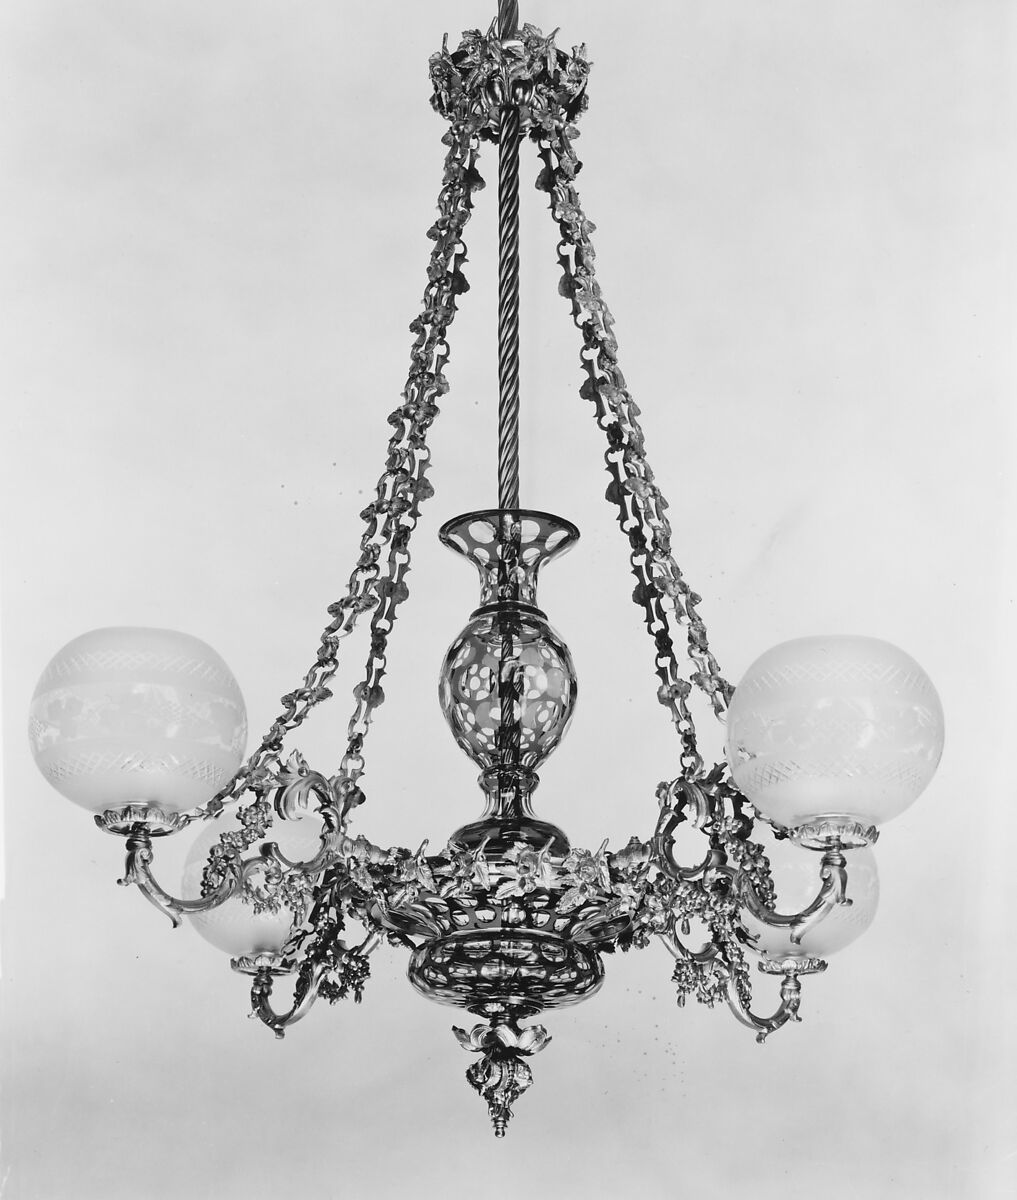 Chandelier, Probably designed by Henry N. Hooper and Company (ca. 1831–68), Glass, brass, American 